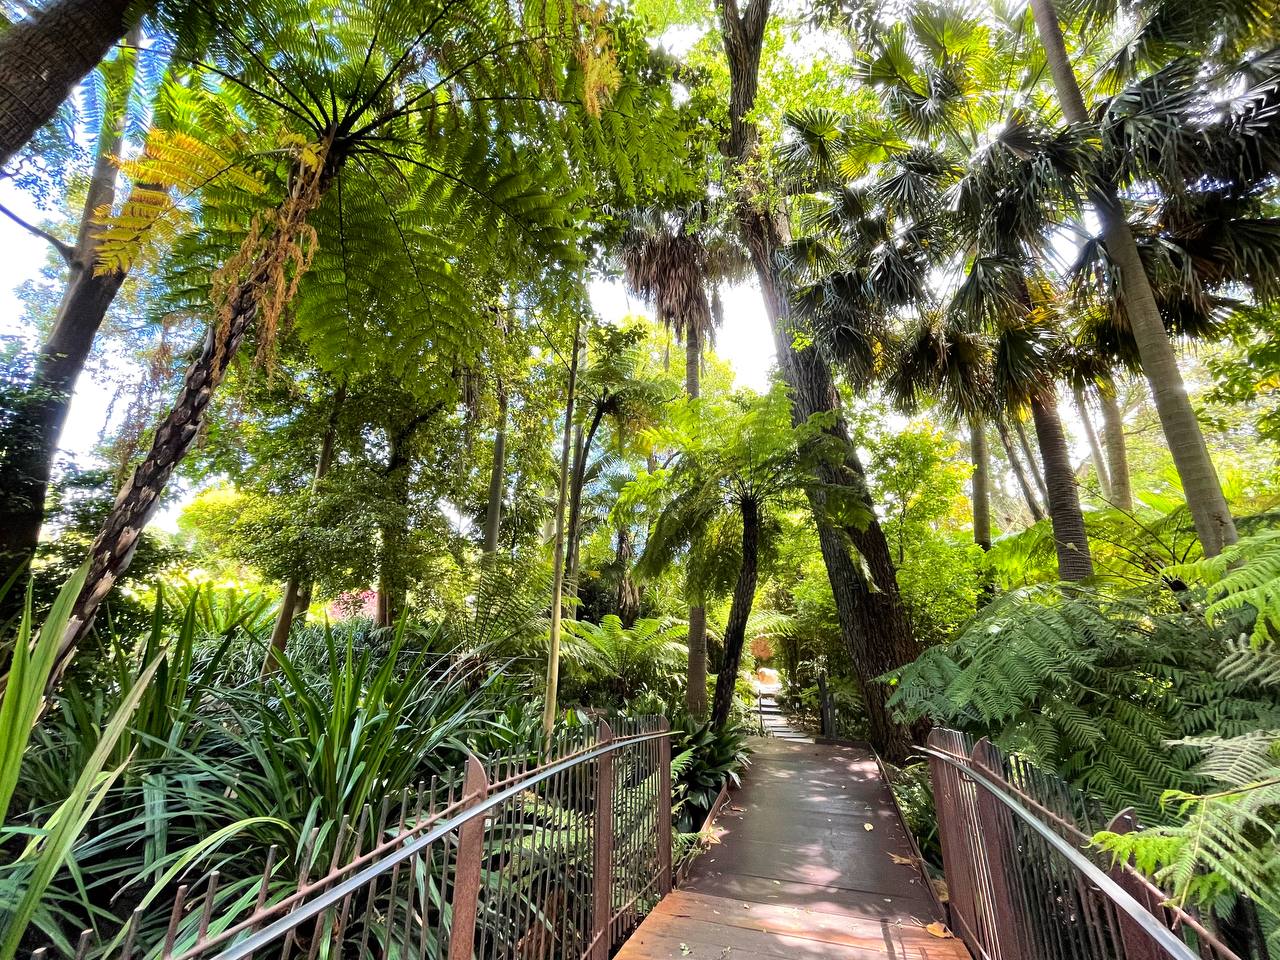 A metal bridge and walkway winds through a series of palm trees and ferns, giving off a tropical vibe